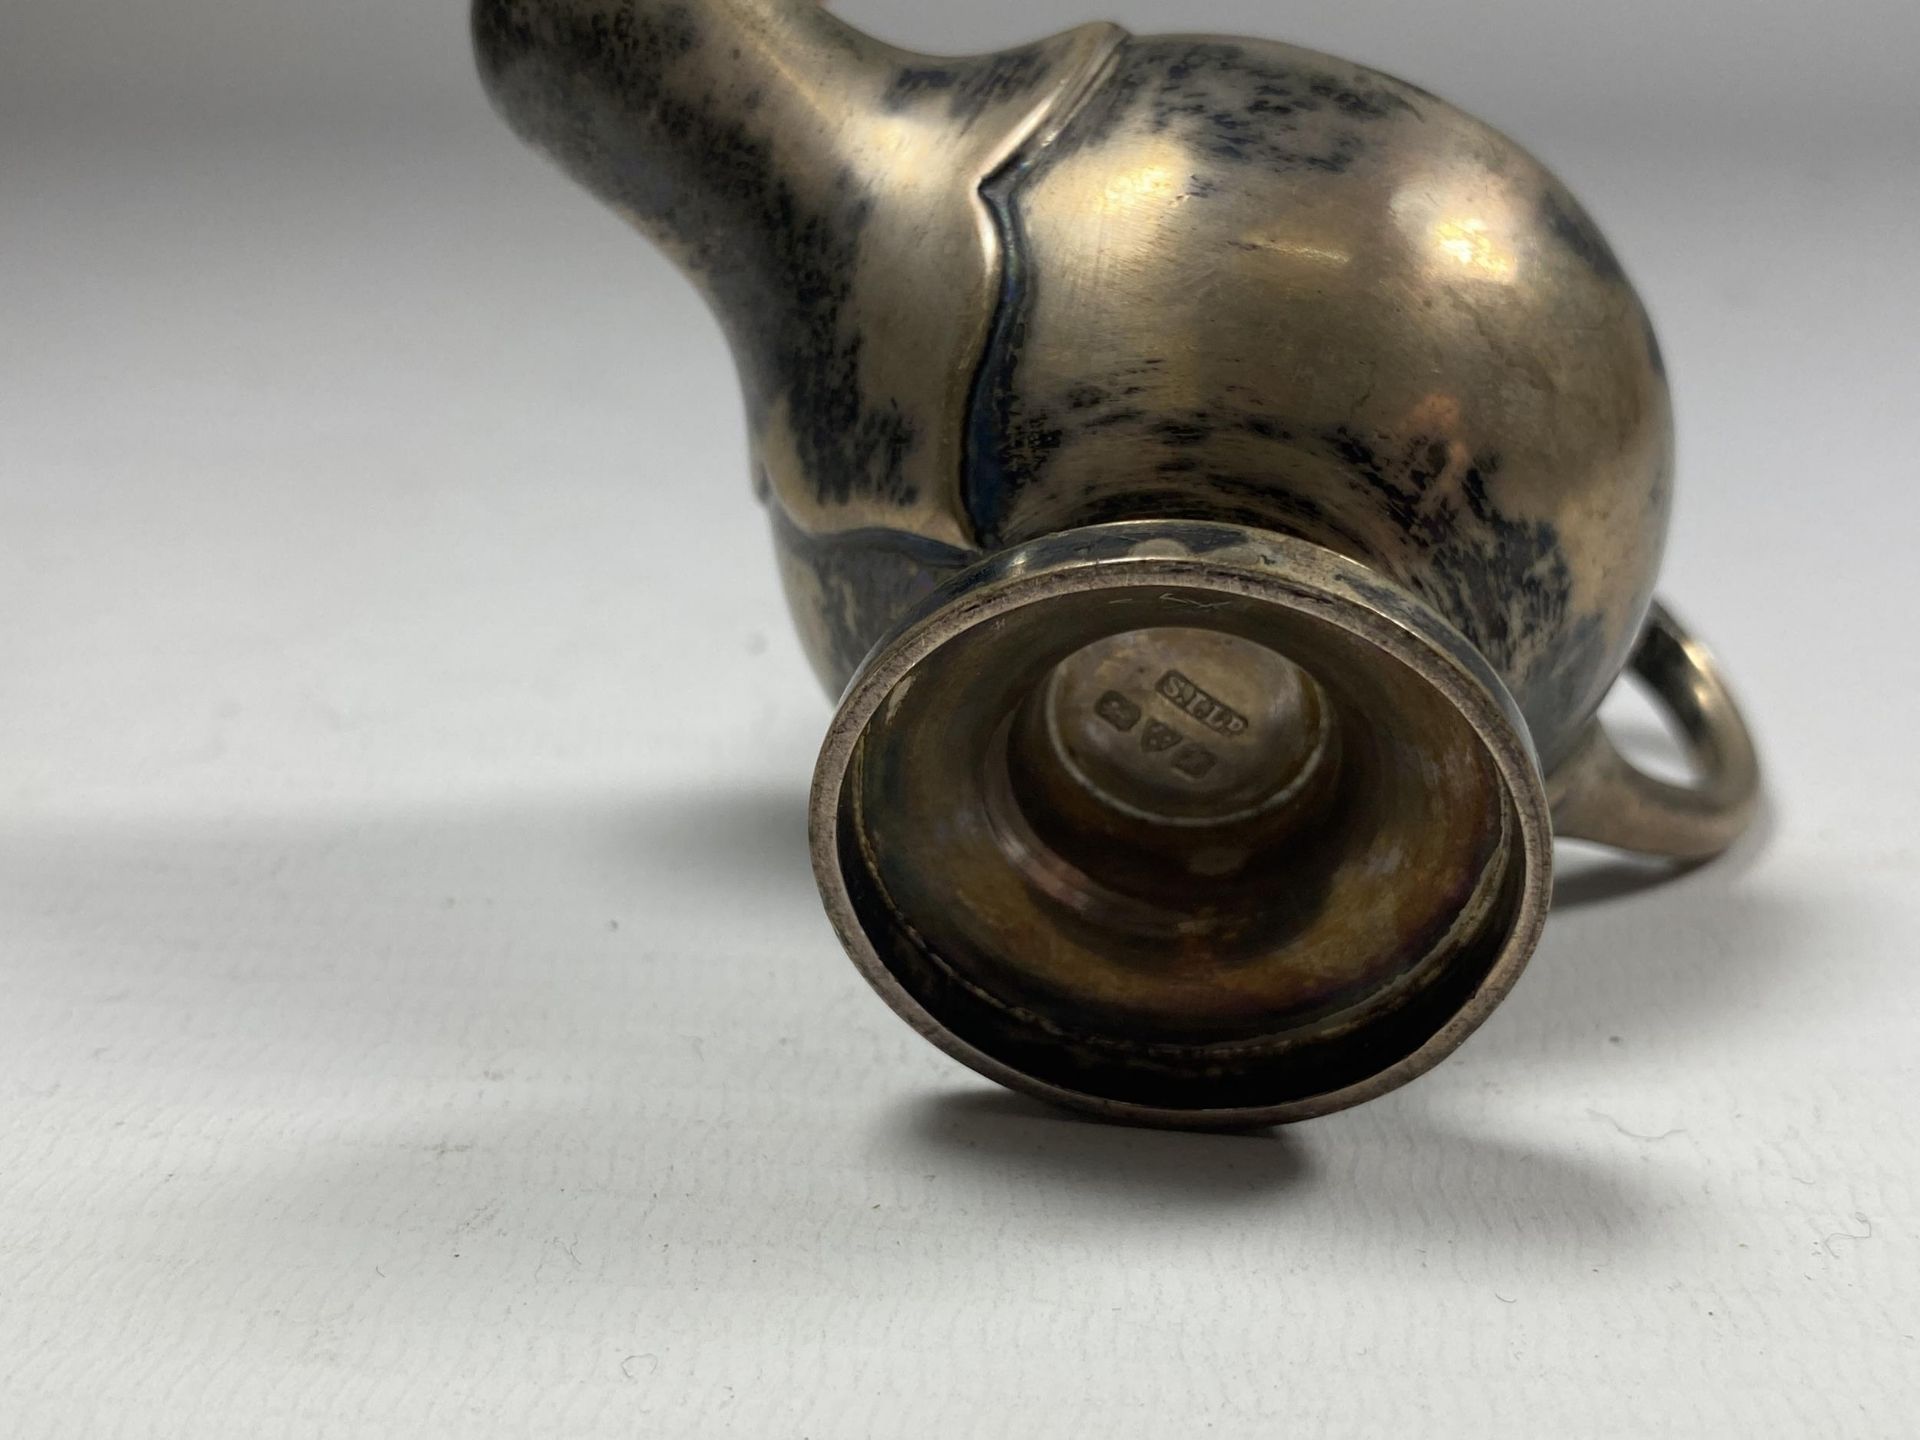 A CHESTER HALLMARKED SILVER MINIATURE GENIE'S LAMP, LENGTH 9CM - Image 3 of 3